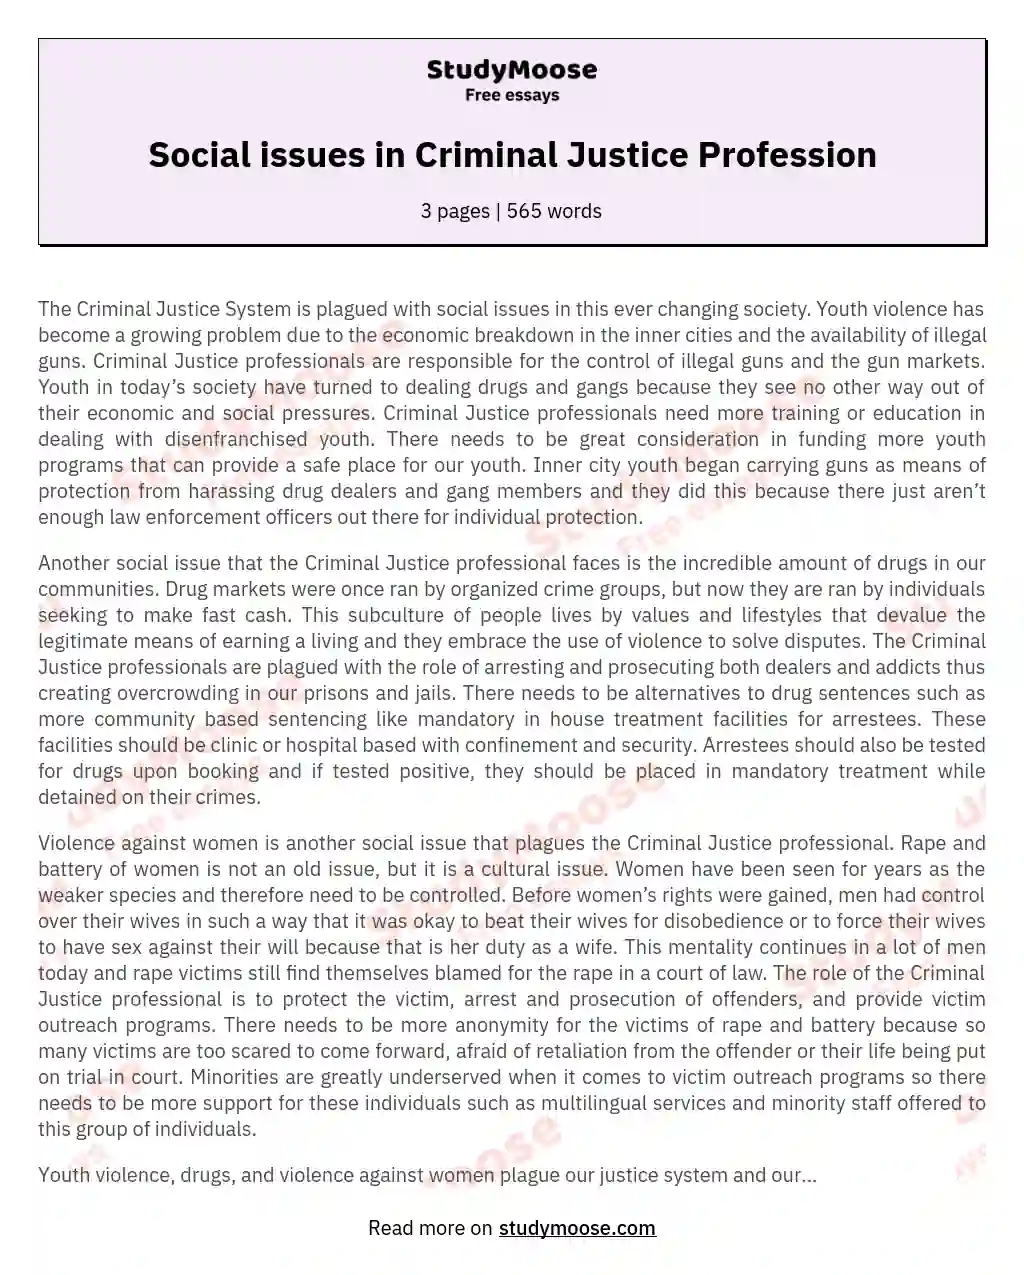 Social issues in Criminal Justice Profession essay